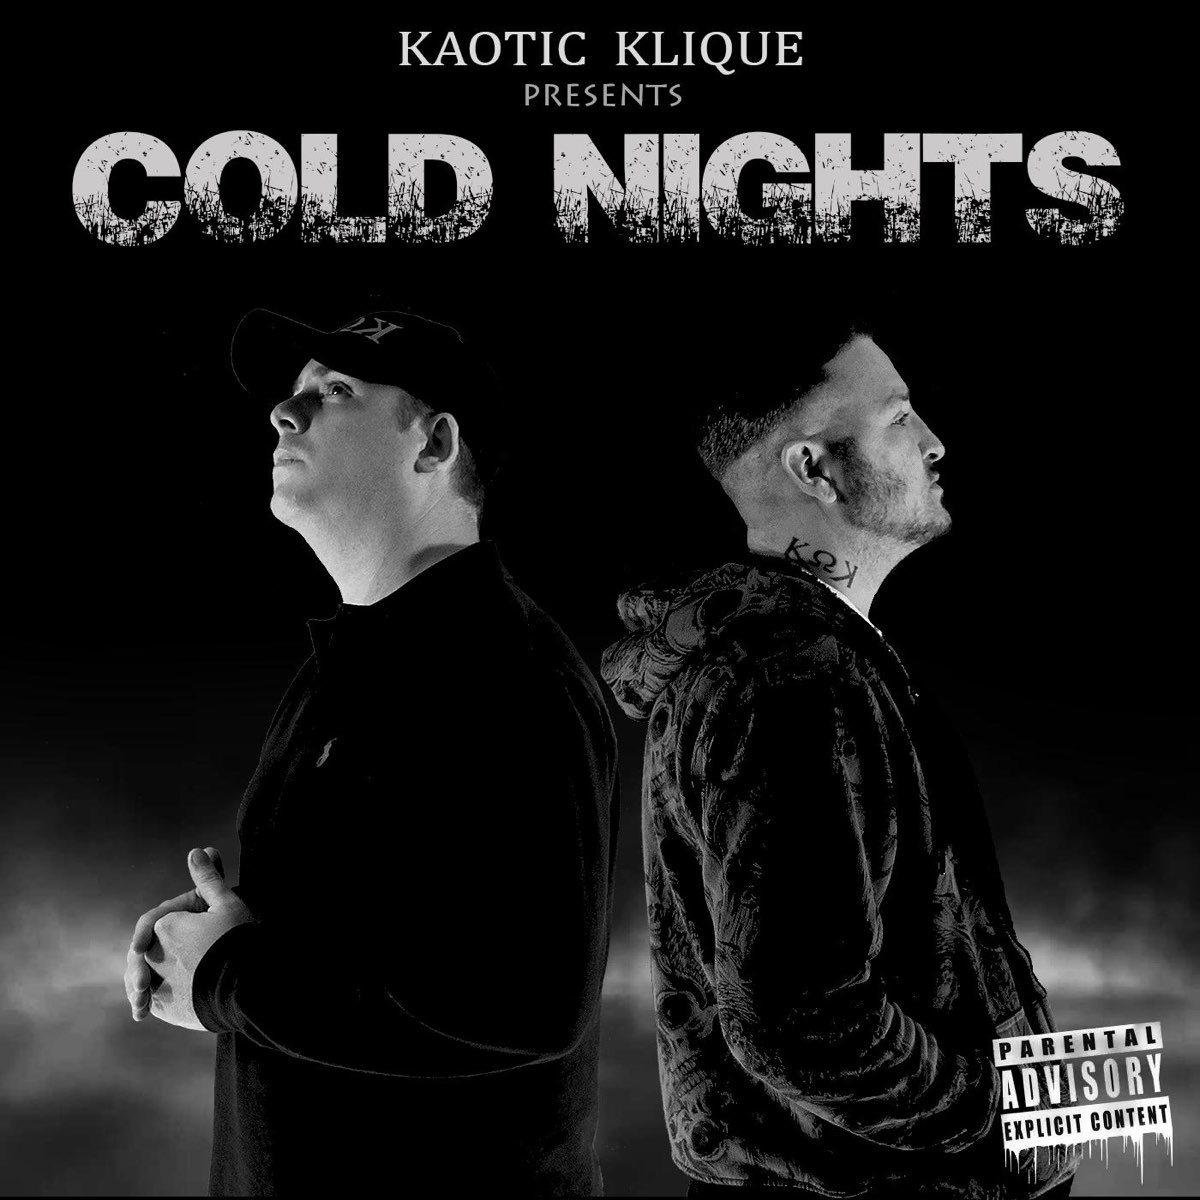 Kaotic Klique. Kaotic. Kaotic Klique face. On this Cold Cold Night. Cold nights 3